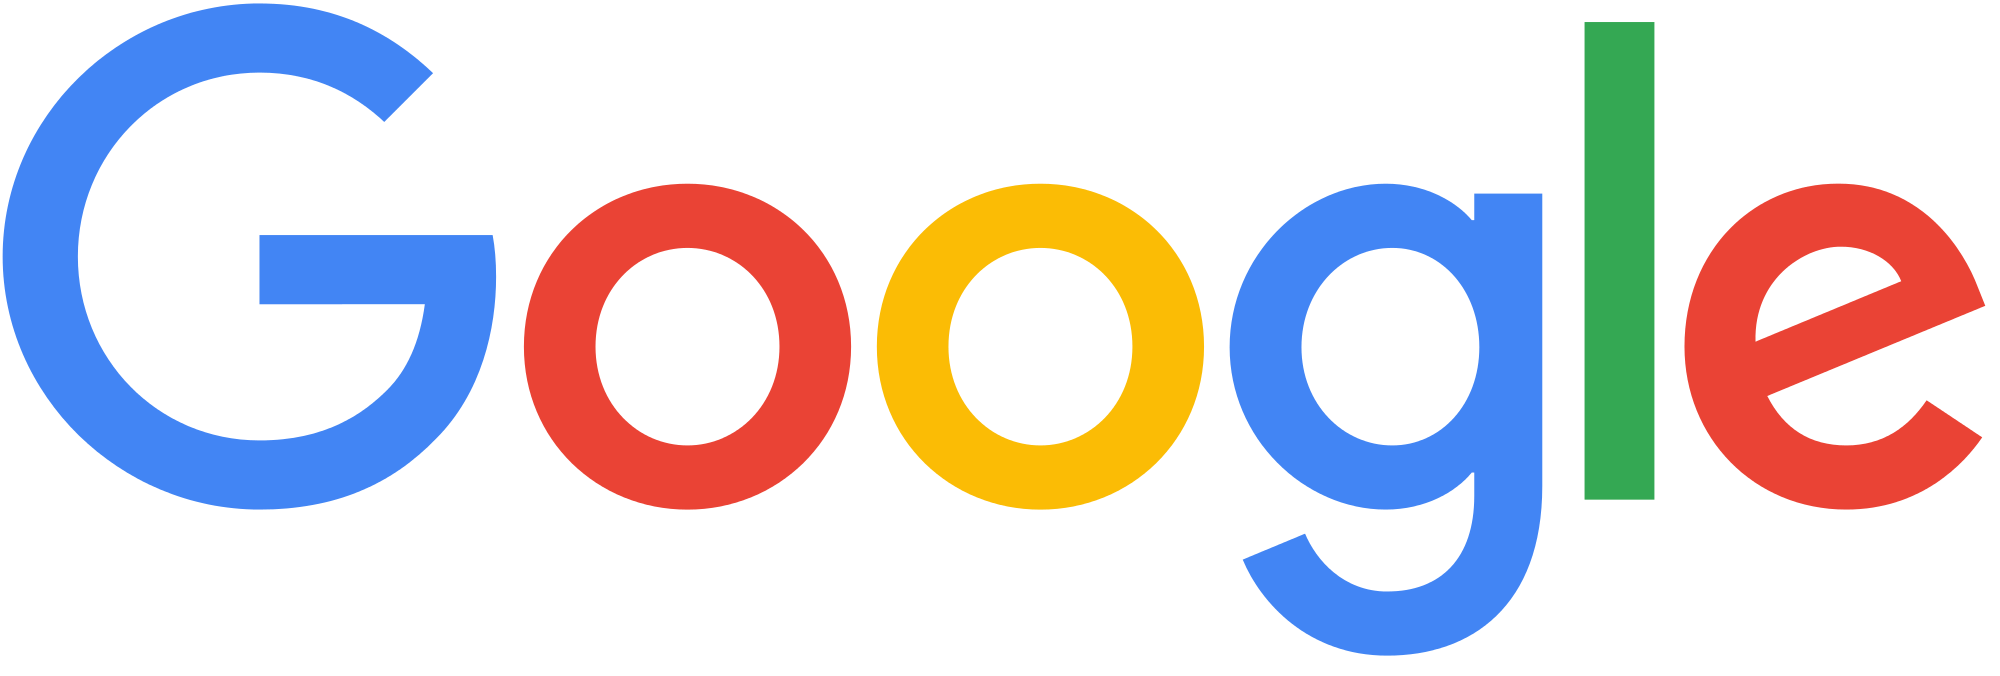 This is the Google logo.